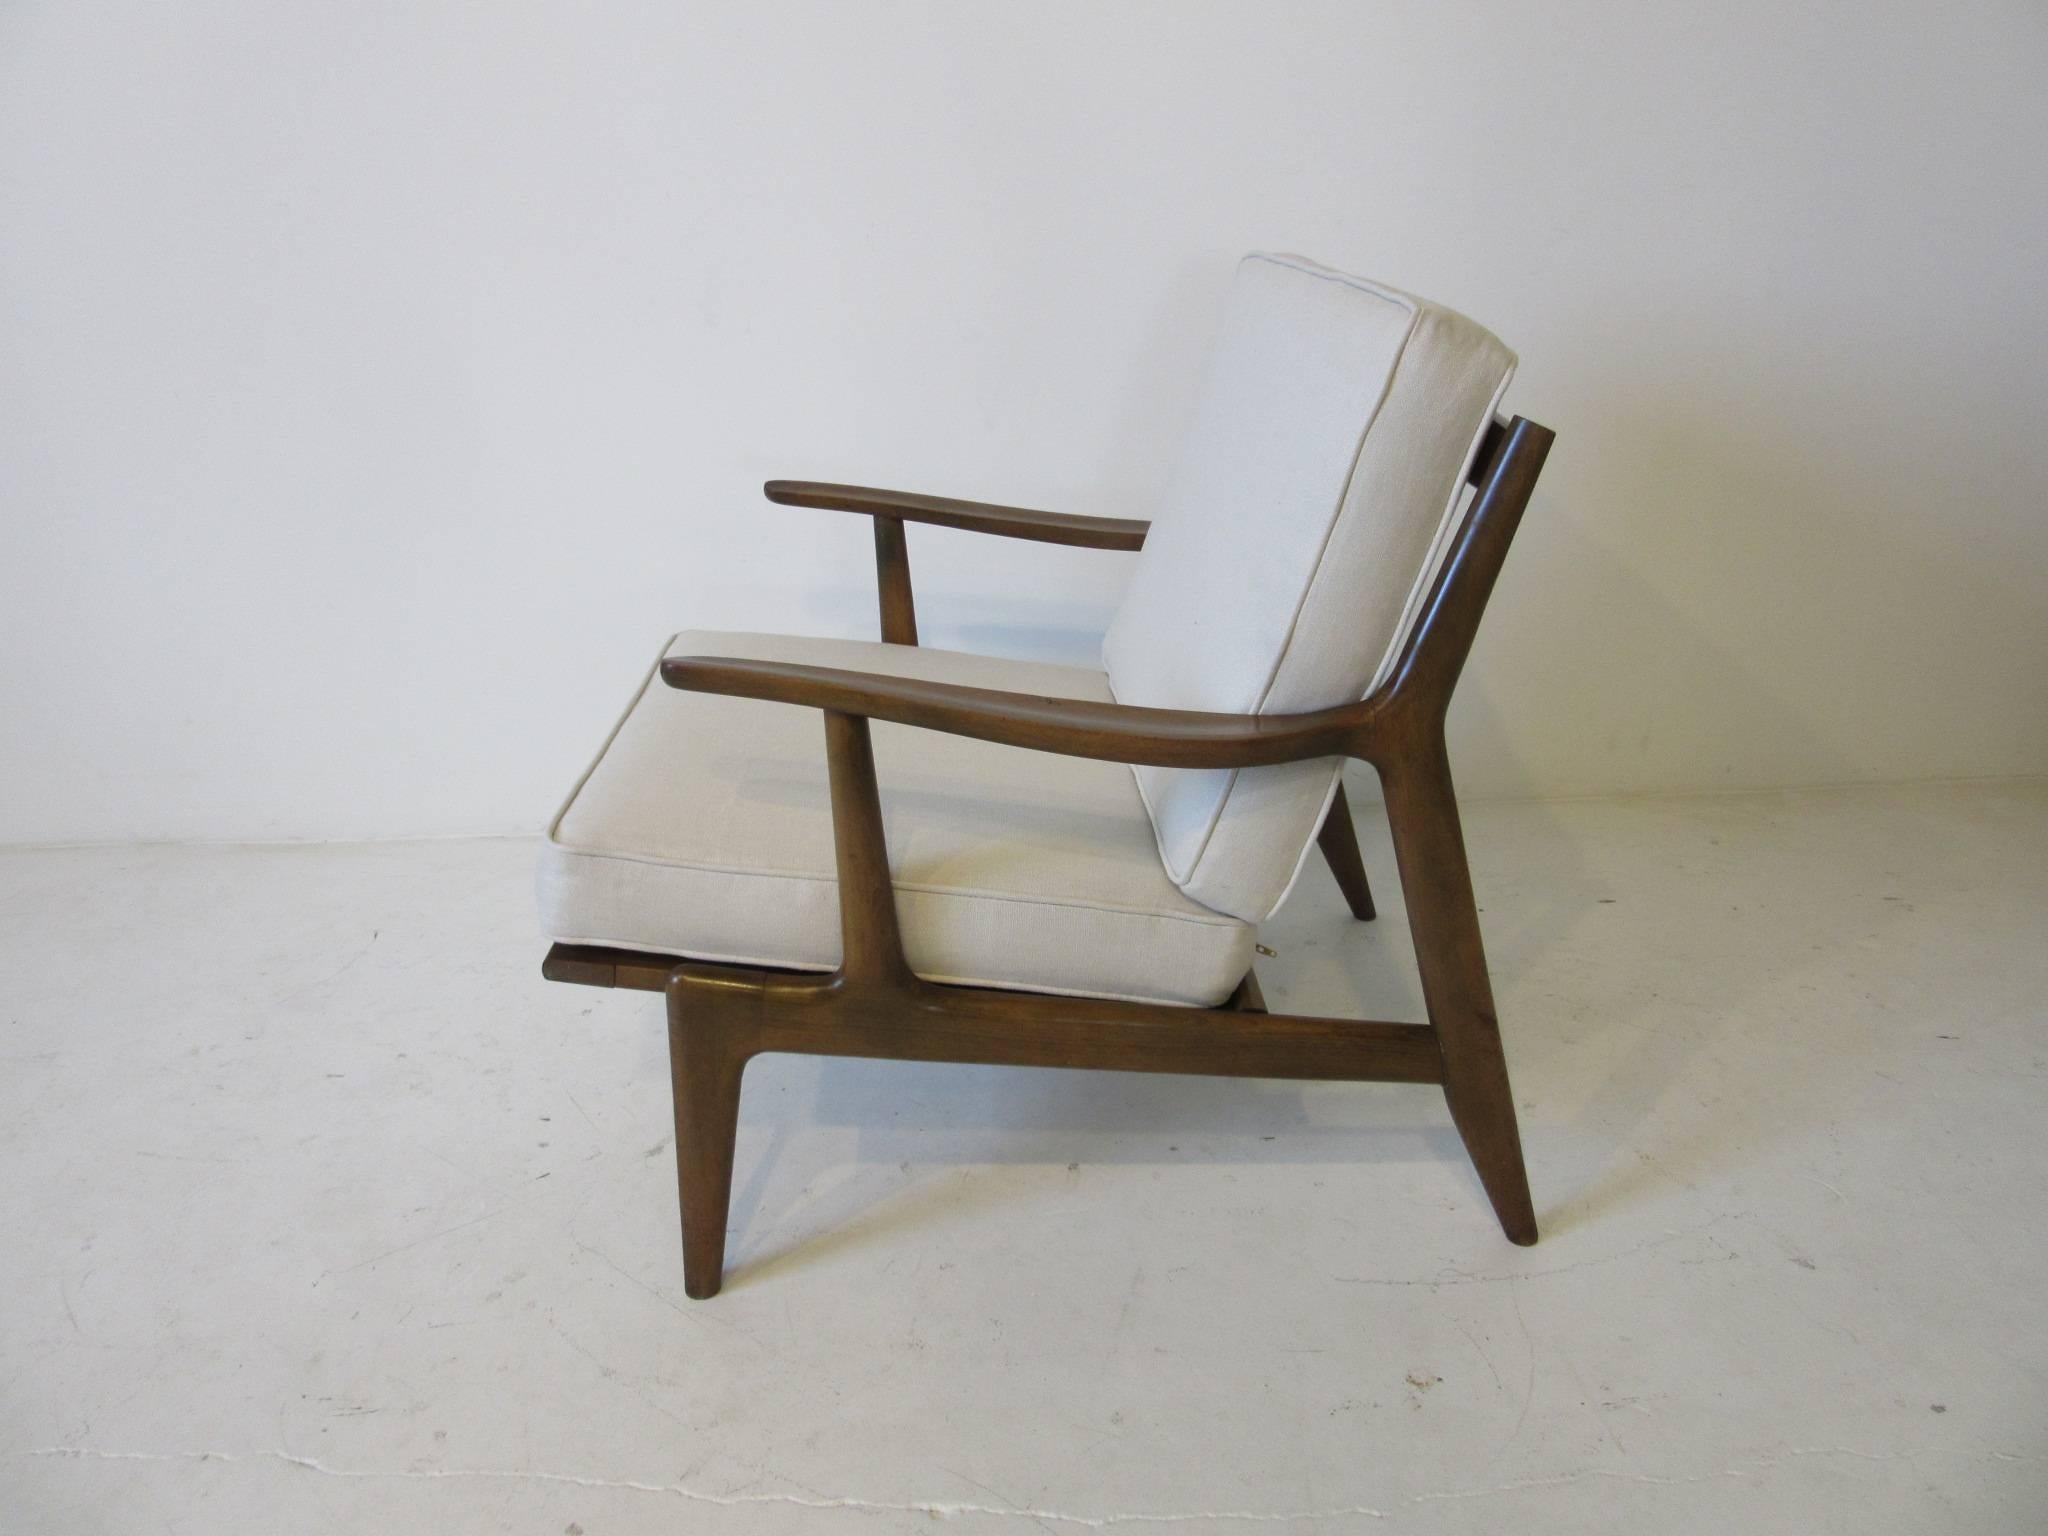 A wood frame Italian lounge chair with two loose box upholstered cushions in the manner of a Danish chair from the period. Upholstered in a beige linen and having sculptural wood back braces and front leg detail, retains the label Made In Italy.